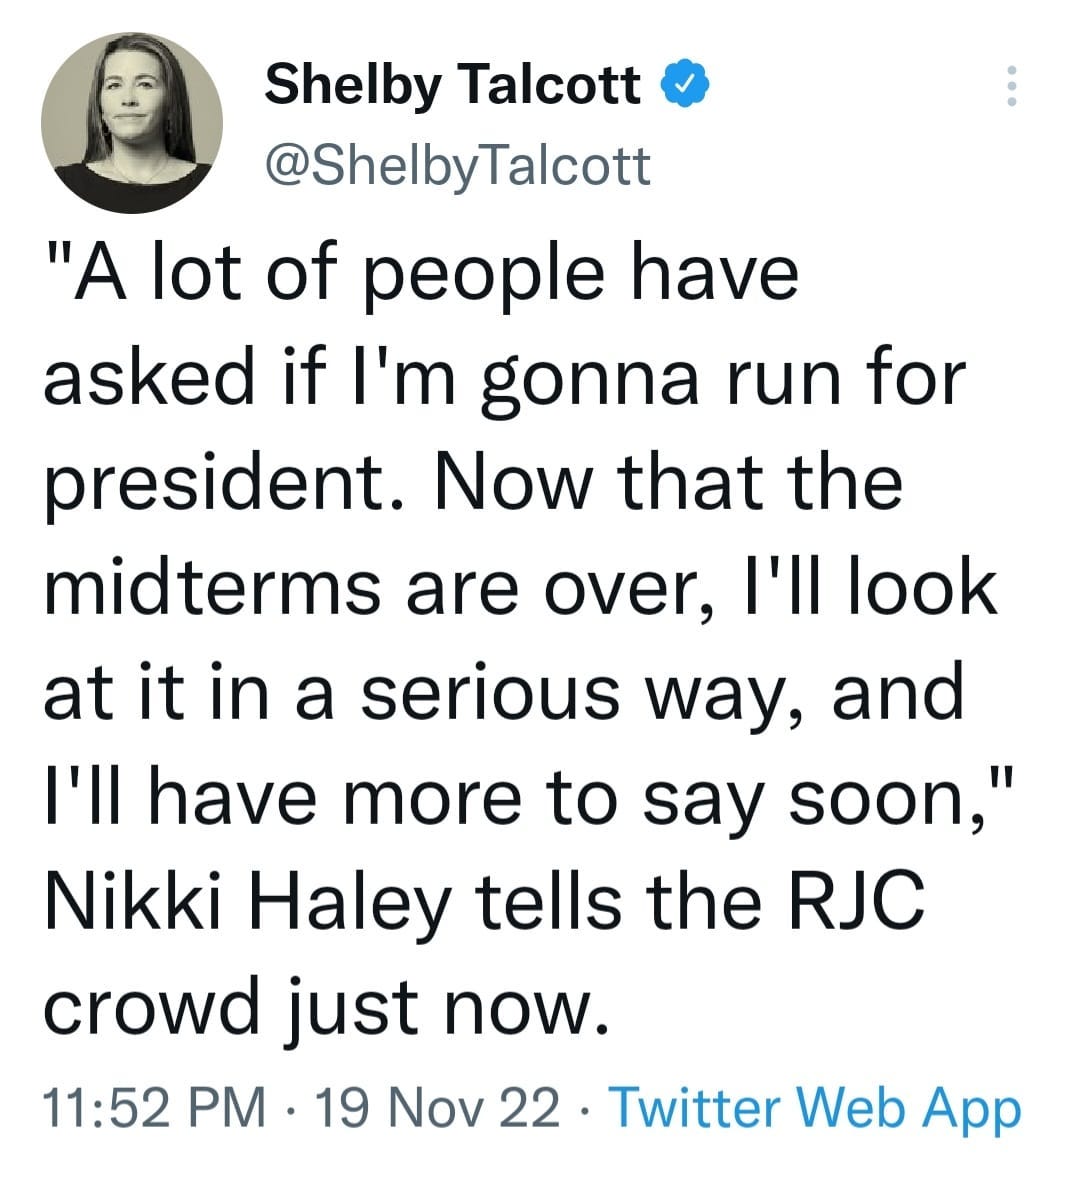 May be a Twitter screenshot of 1 person and text that says 'Shelby Talcott @ShelbyTalcott "A lot of people have asked if I'm gonna run for president. Now that the midterms are over, I'll look at it in a serious way, and I'll have more to say soon," Nikki Haley tells the RJC crowd just now. 11:52 PM 19 Nov 22 Twitter Web App'